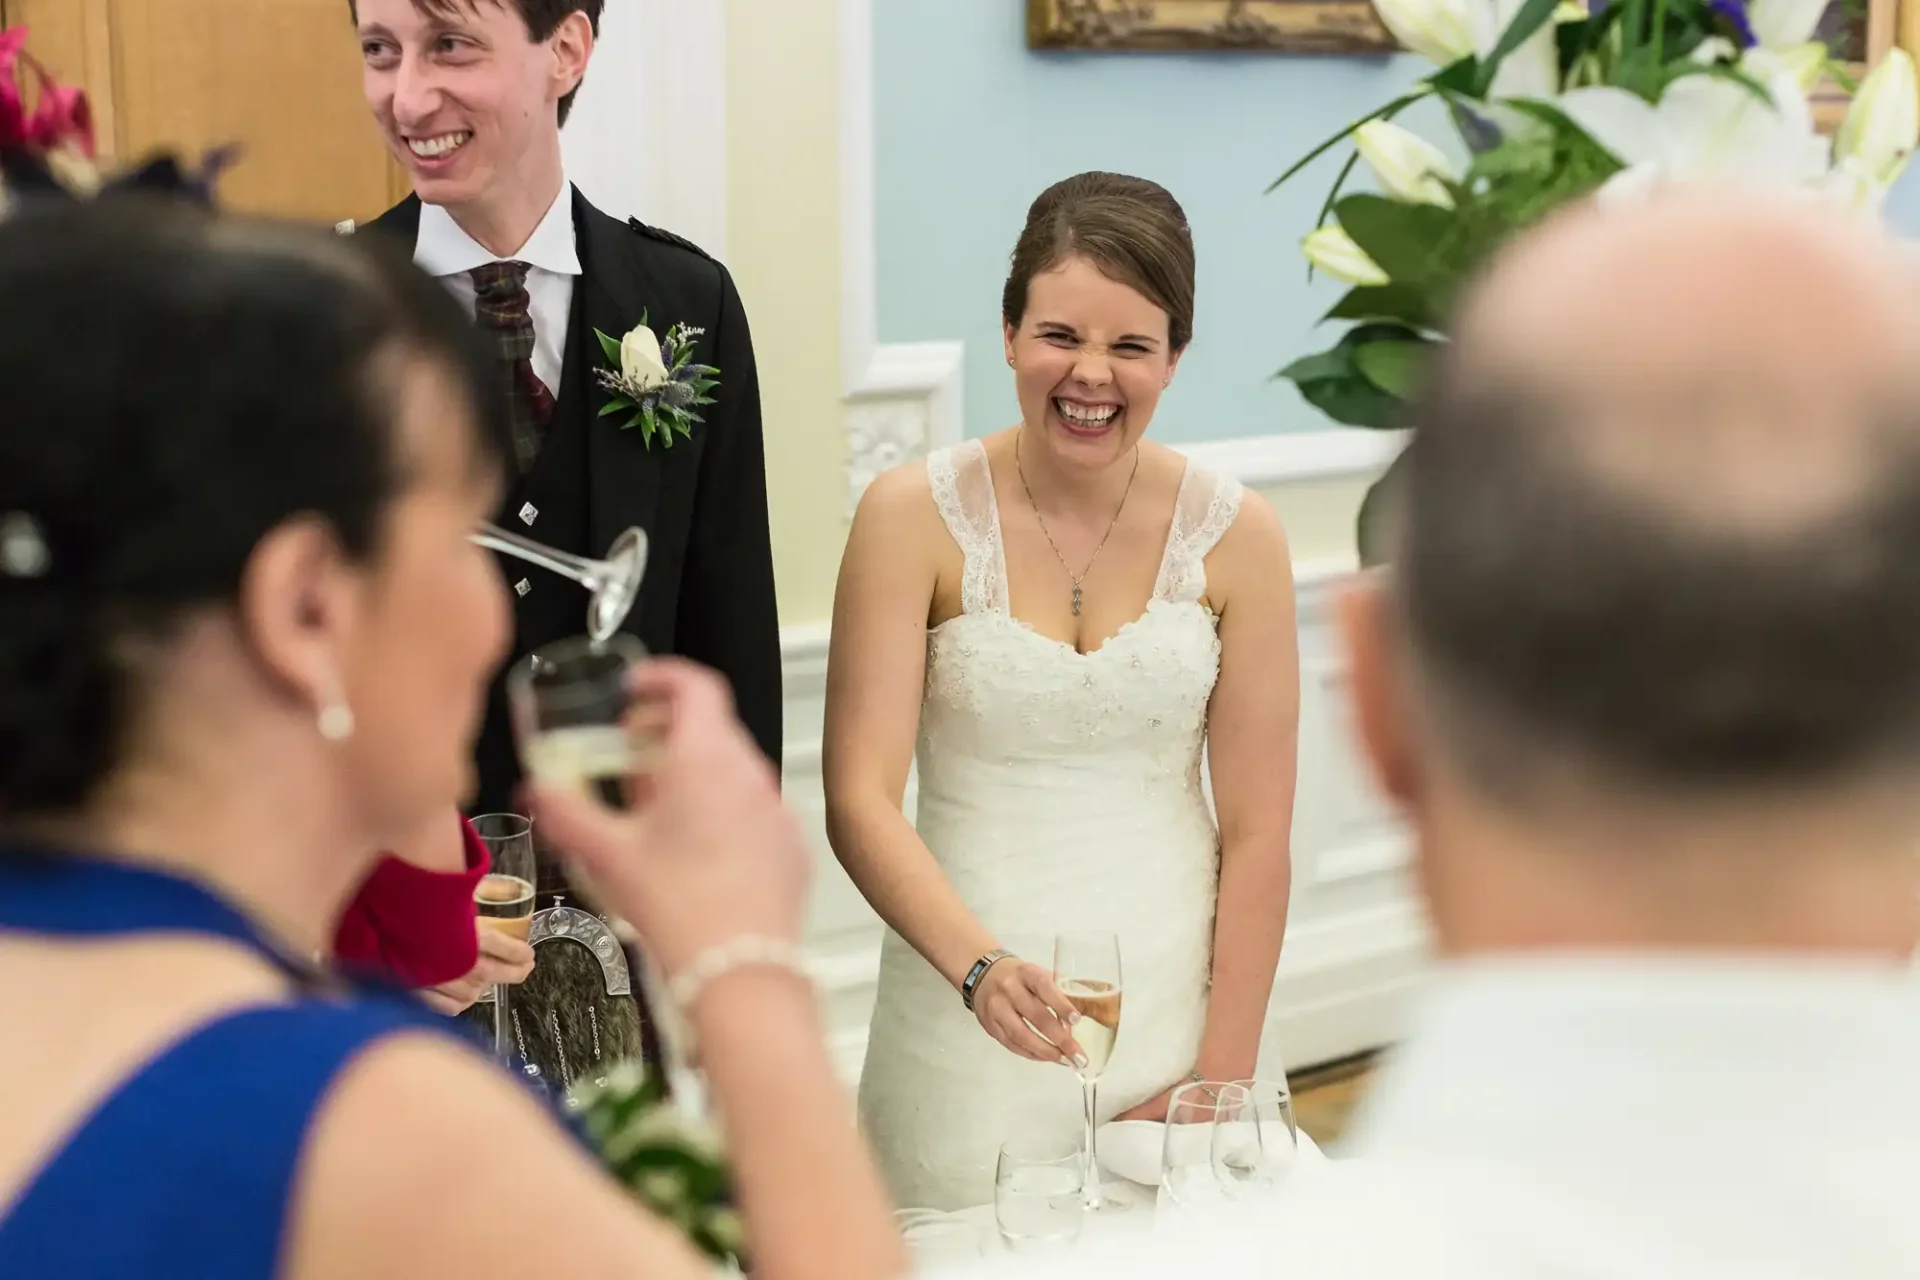 Bride laughing joyfully at a table during a wedding reception, with a groom next to her and guests interacting around them.